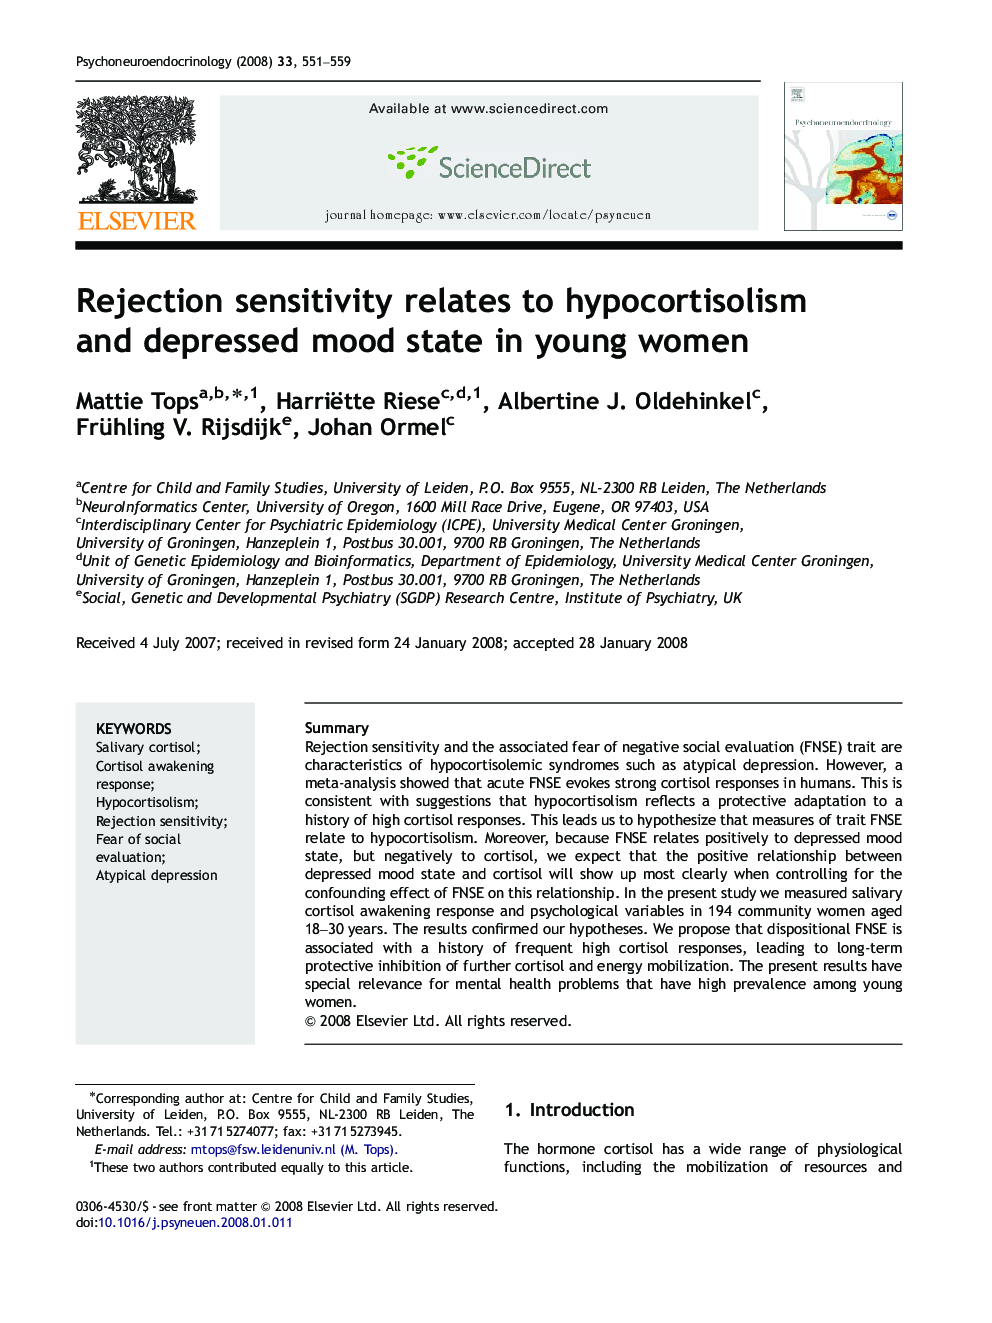 Rejection sensitivity relates to hypocortisolism and depressed mood state in young women